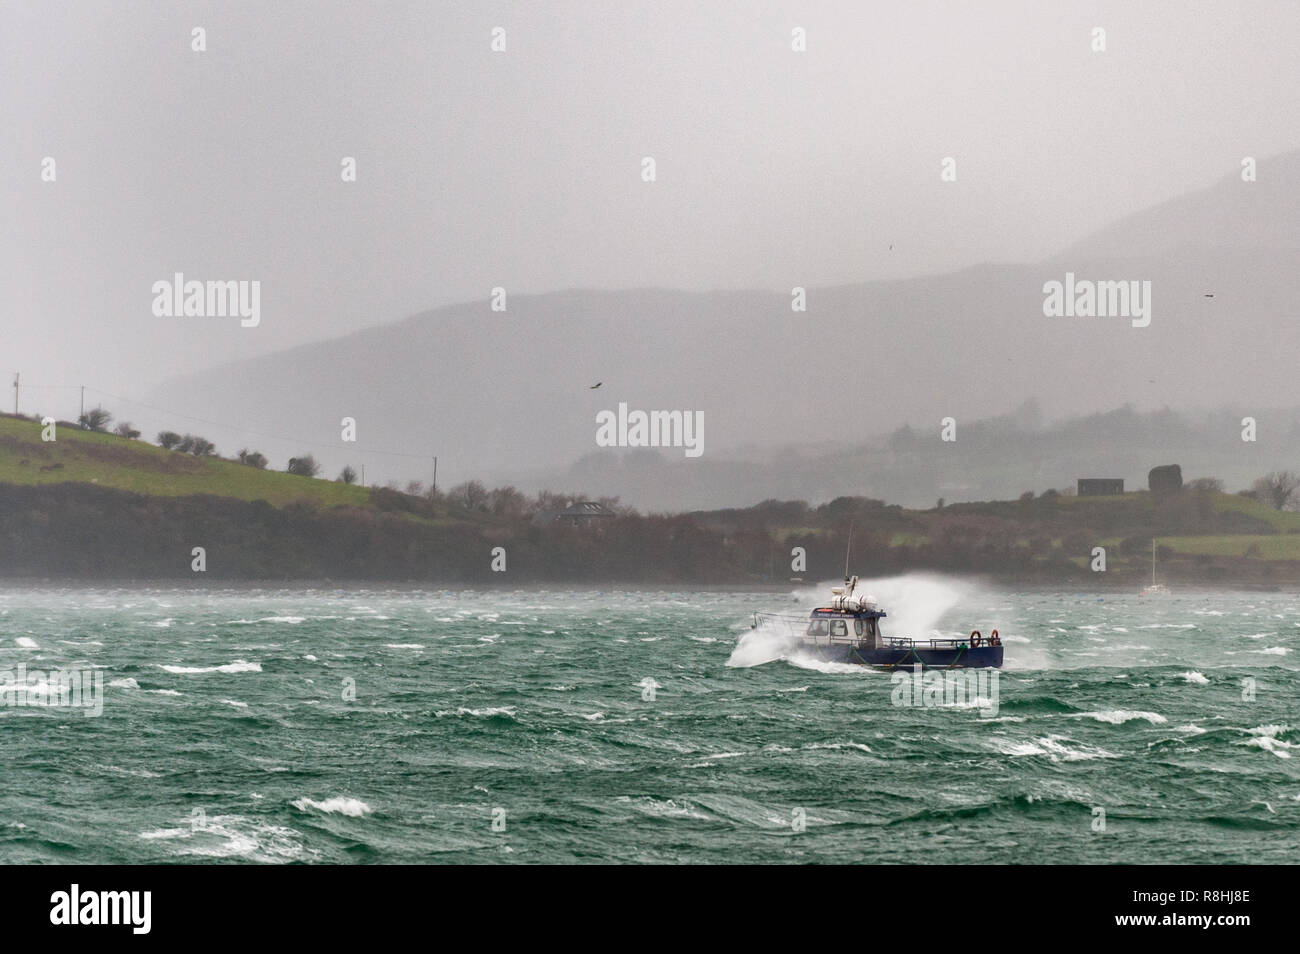 Bantry, West Cork, Ireland. 15th Dec, 2018. The Bantry to Whiddy Island ferry makes the trip in atrocious weather conditions during Storm Deirdre. The Orange Weather Warning for Wexford, Donegal, Cork and Waterford is in place until 10pm this evening. Credit: Andy Gibson/Alamy Live News. Stock Photo